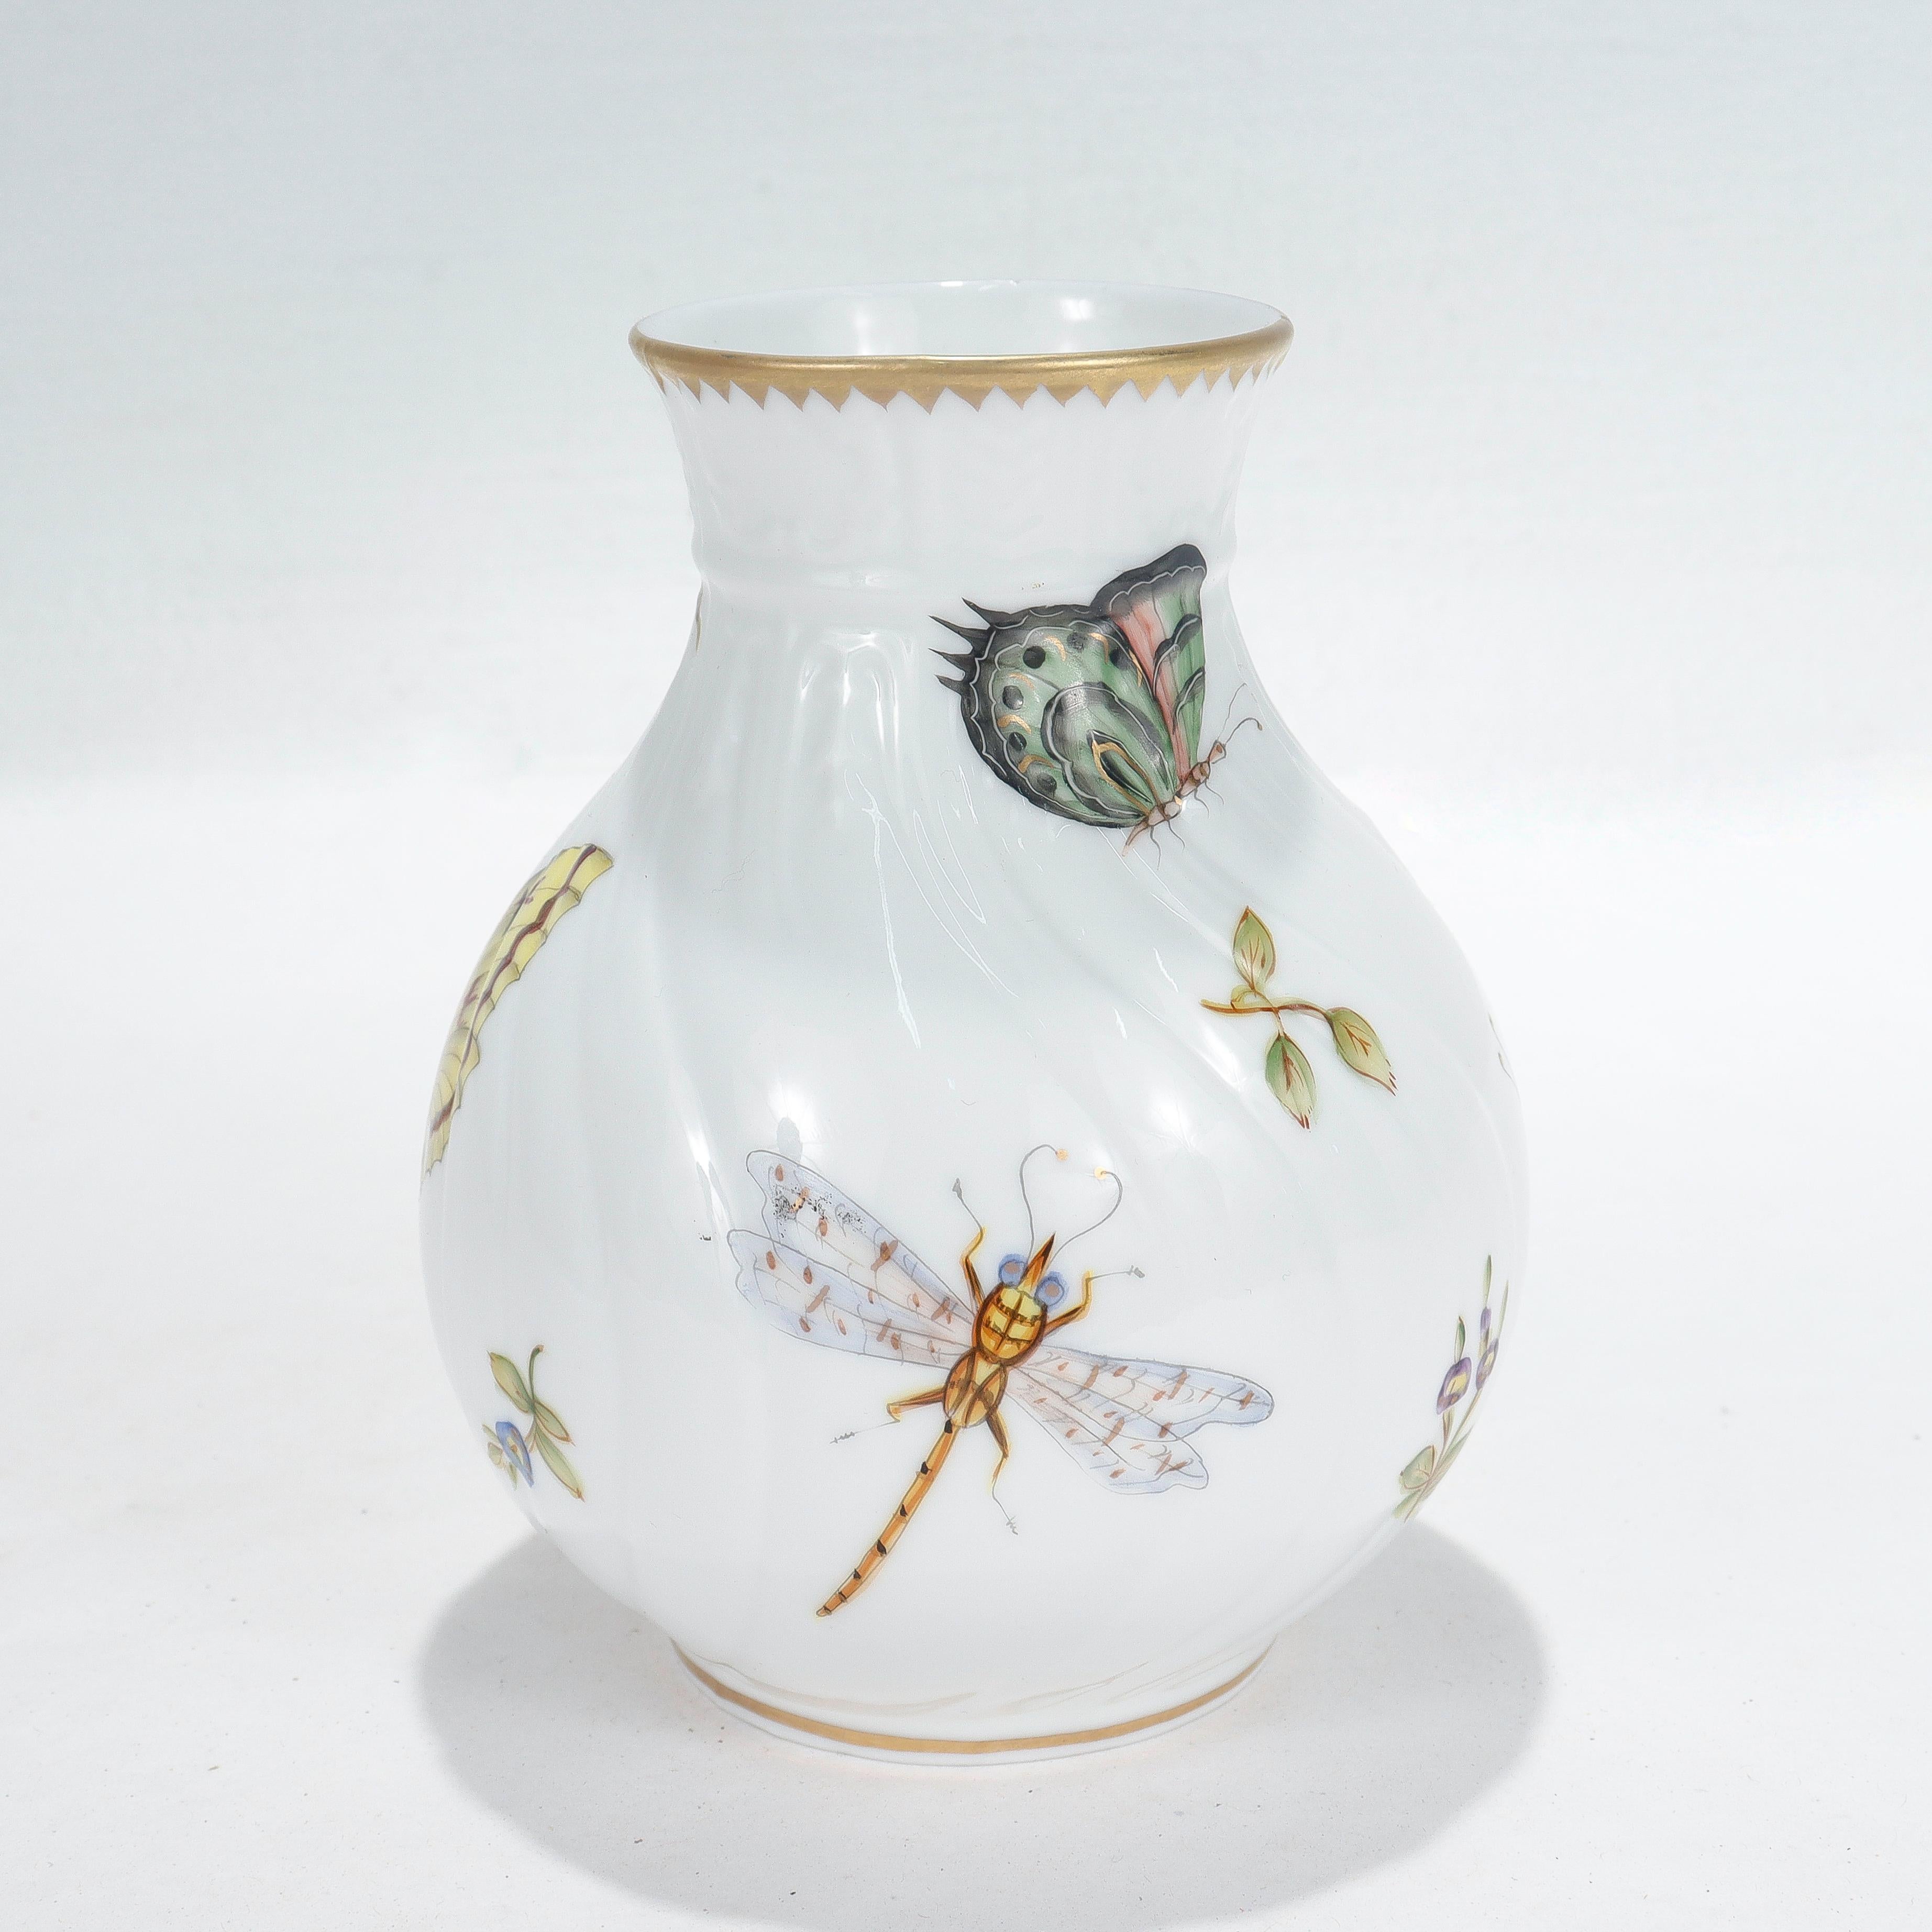 Modern Anna Weatherley Handpainted Budapest Spring Butterfly & Dragonfly Porcelain Vase